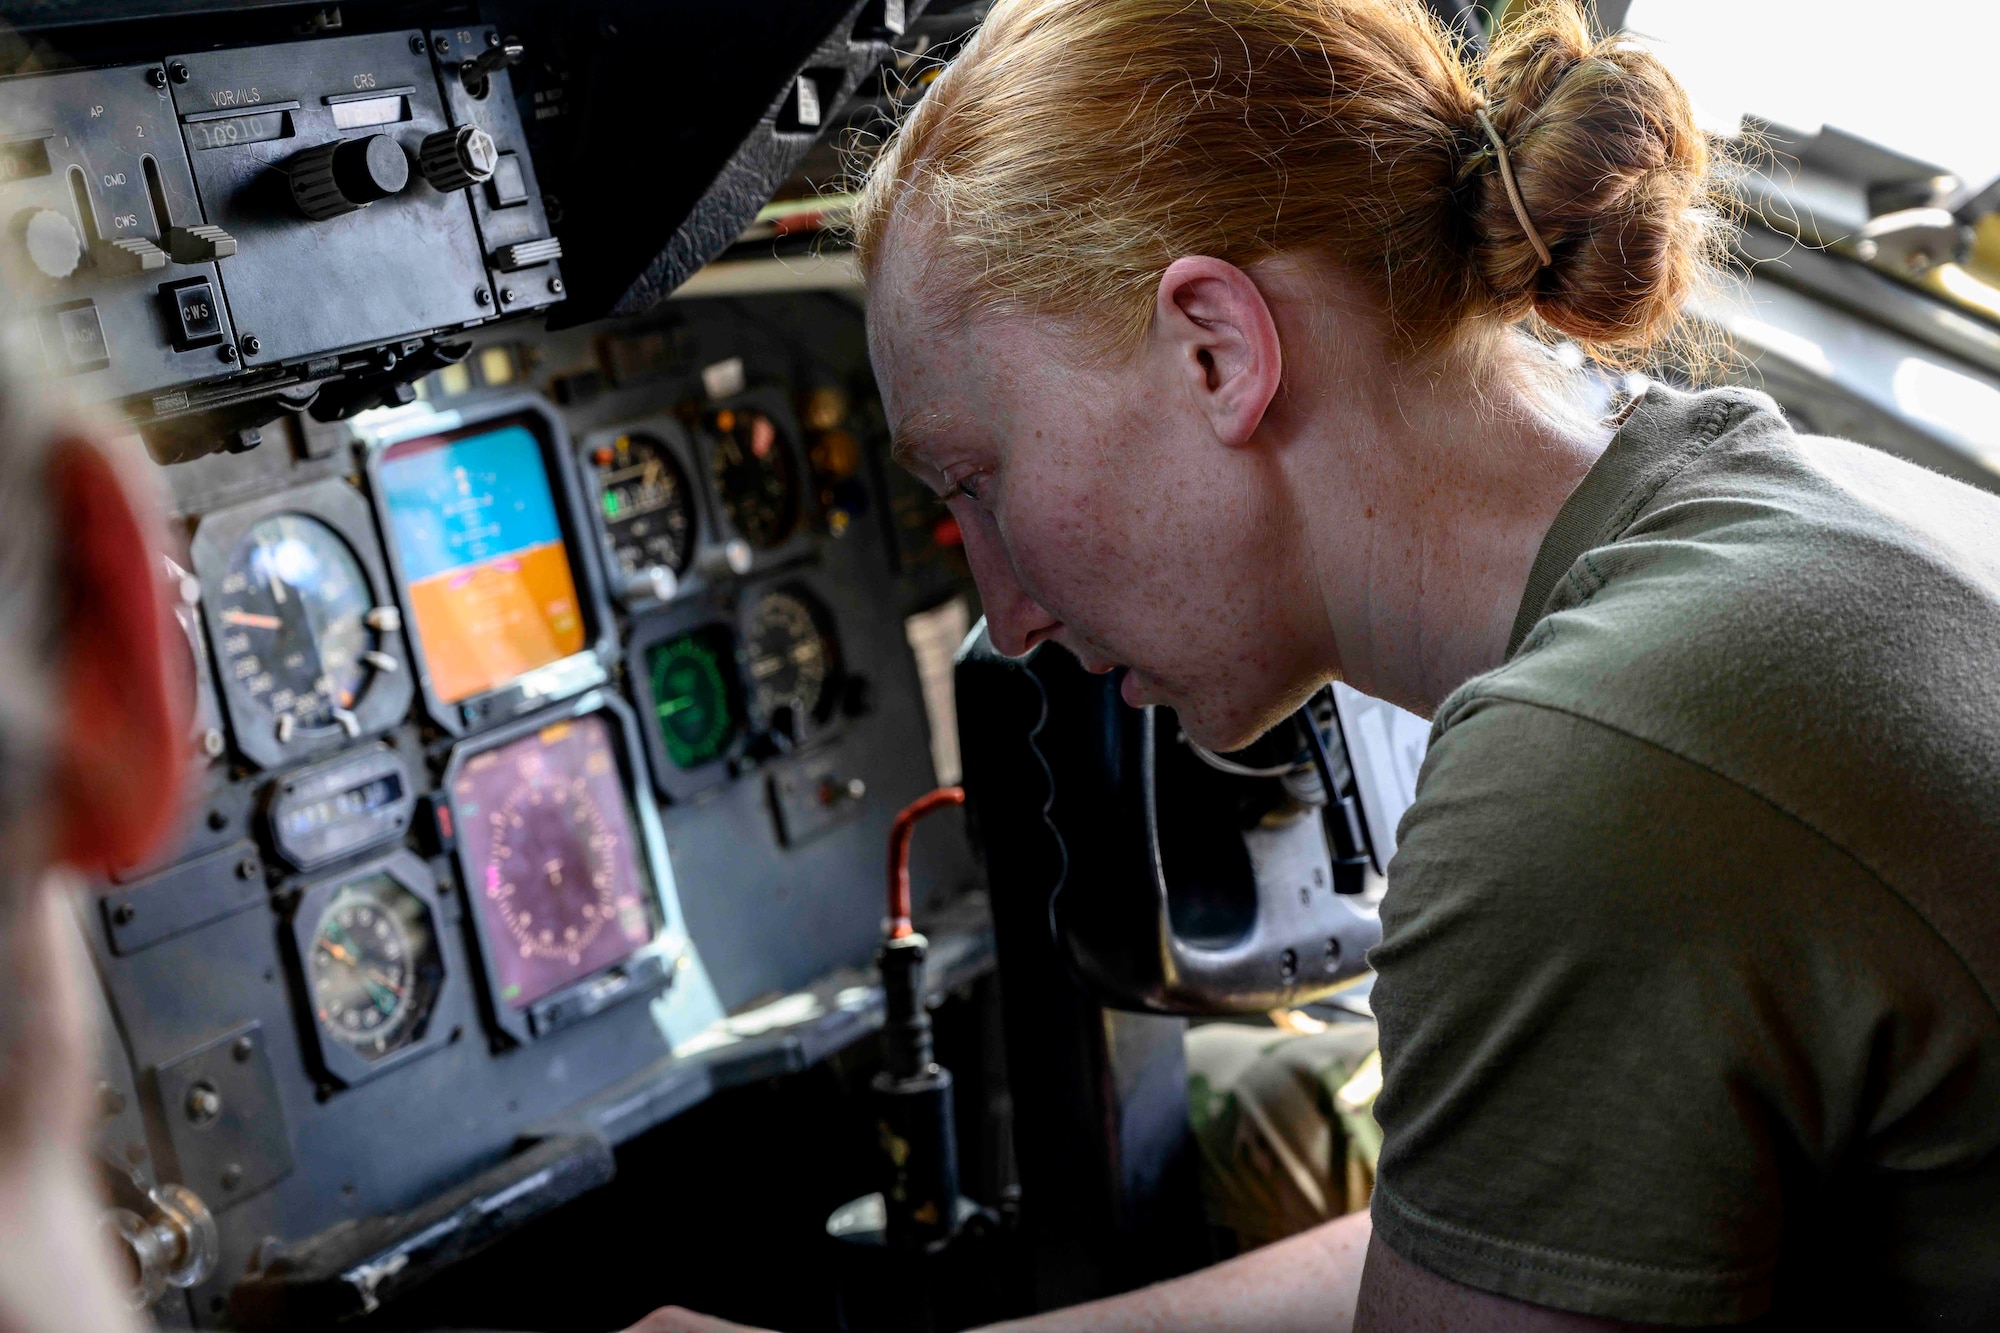 Female pilot in cockpit of aircraft